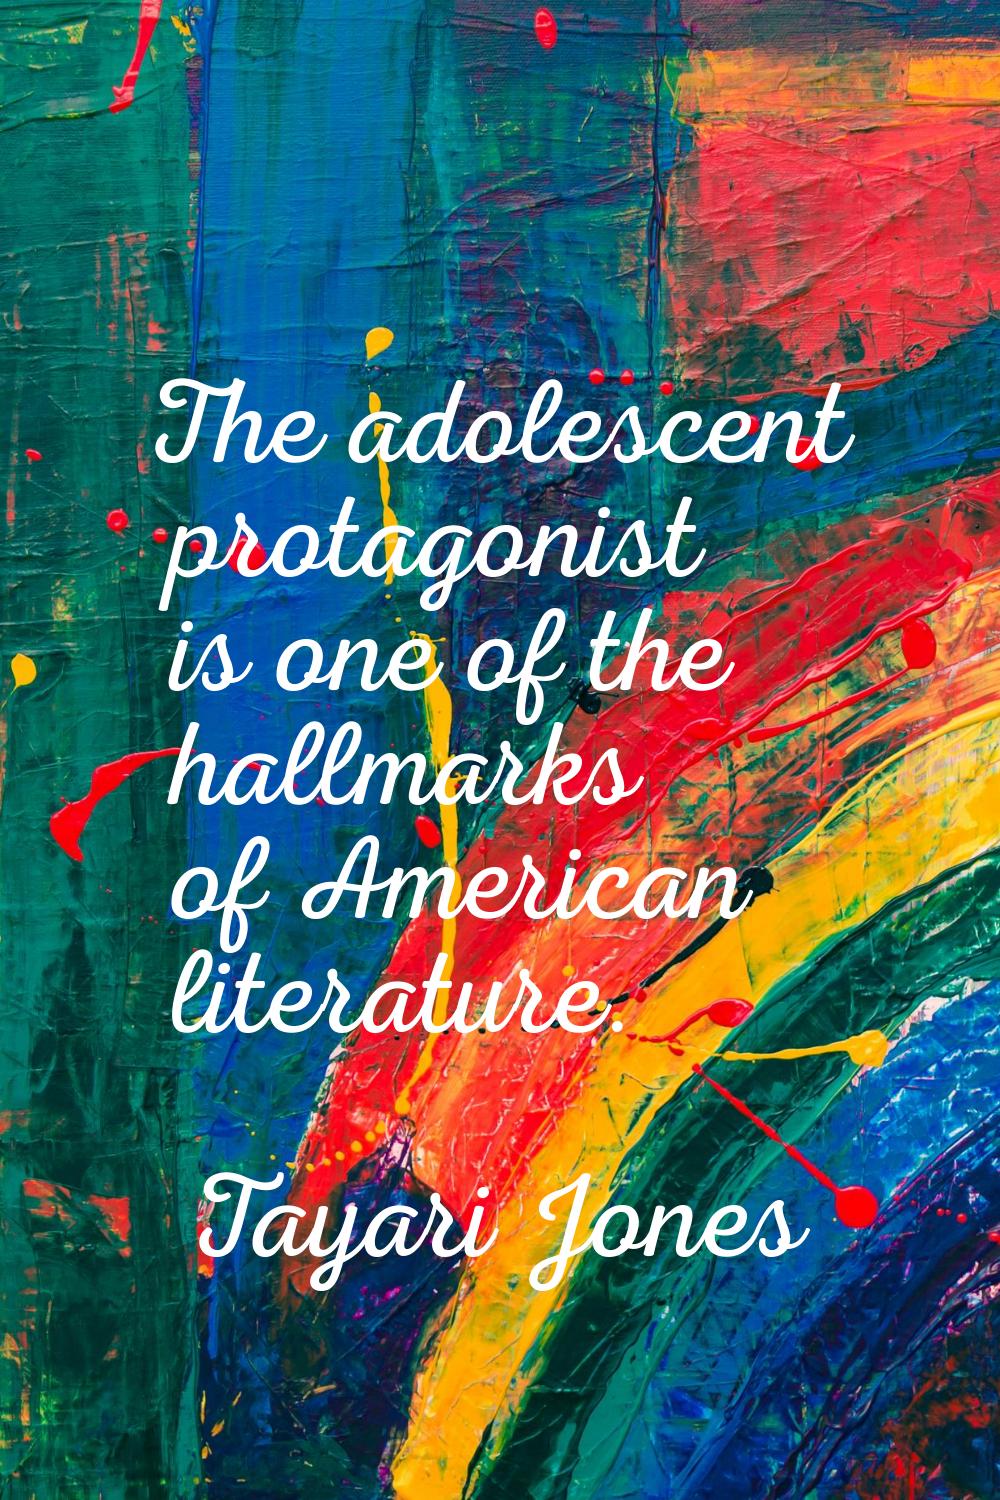 The adolescent protagonist is one of the hallmarks of American literature.